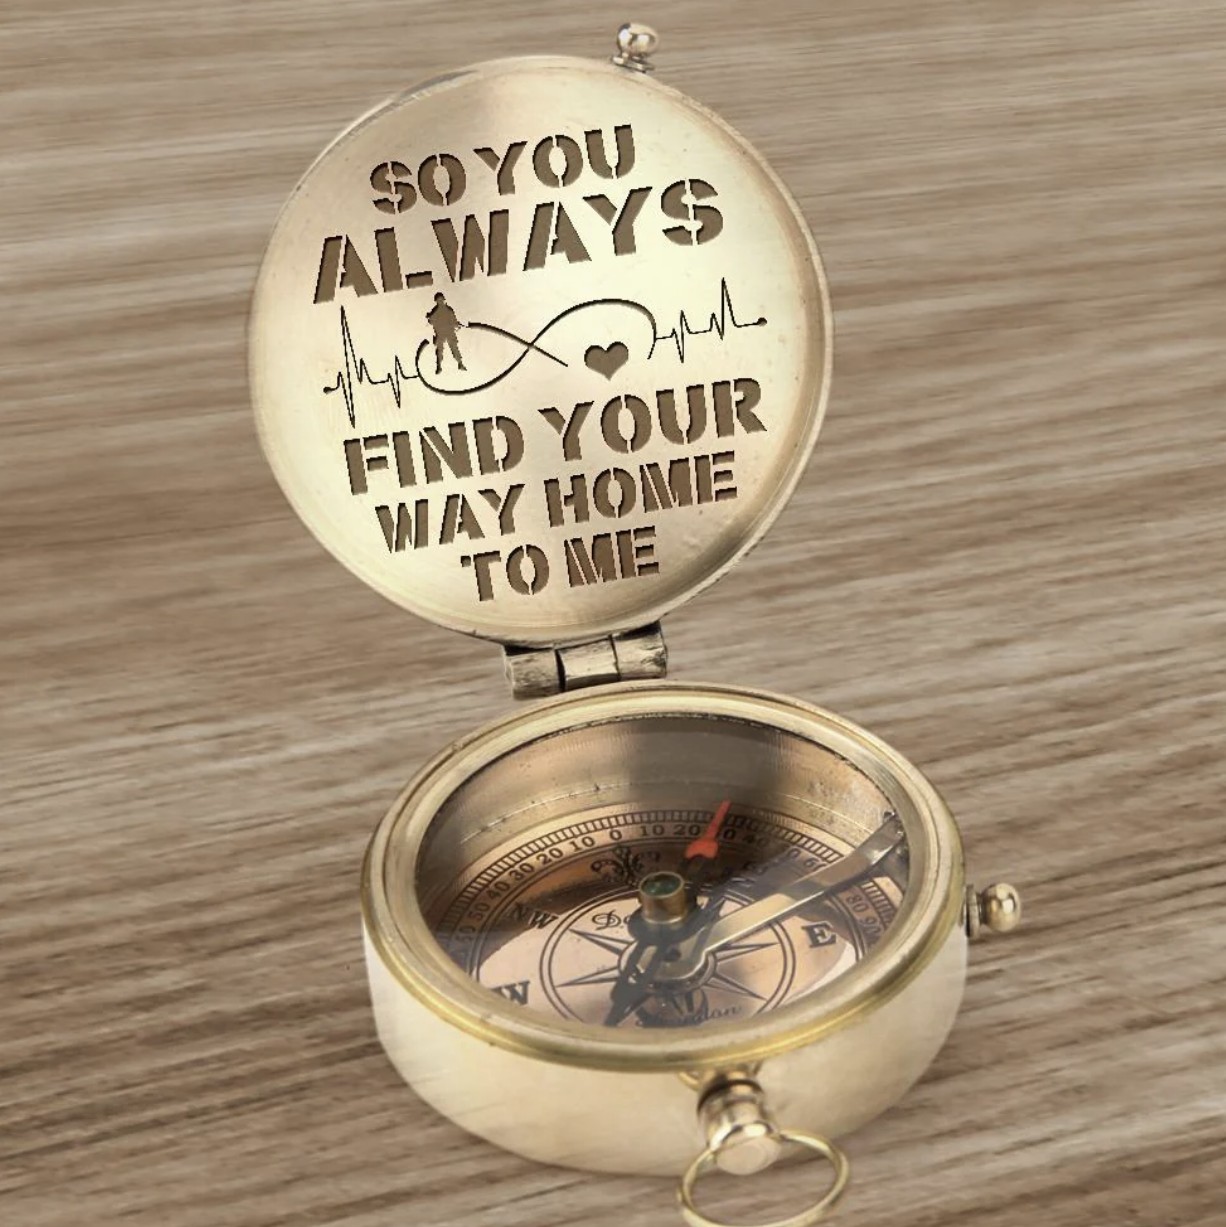 Guide your dad’s way with an Engraved Compass from Wrapsify